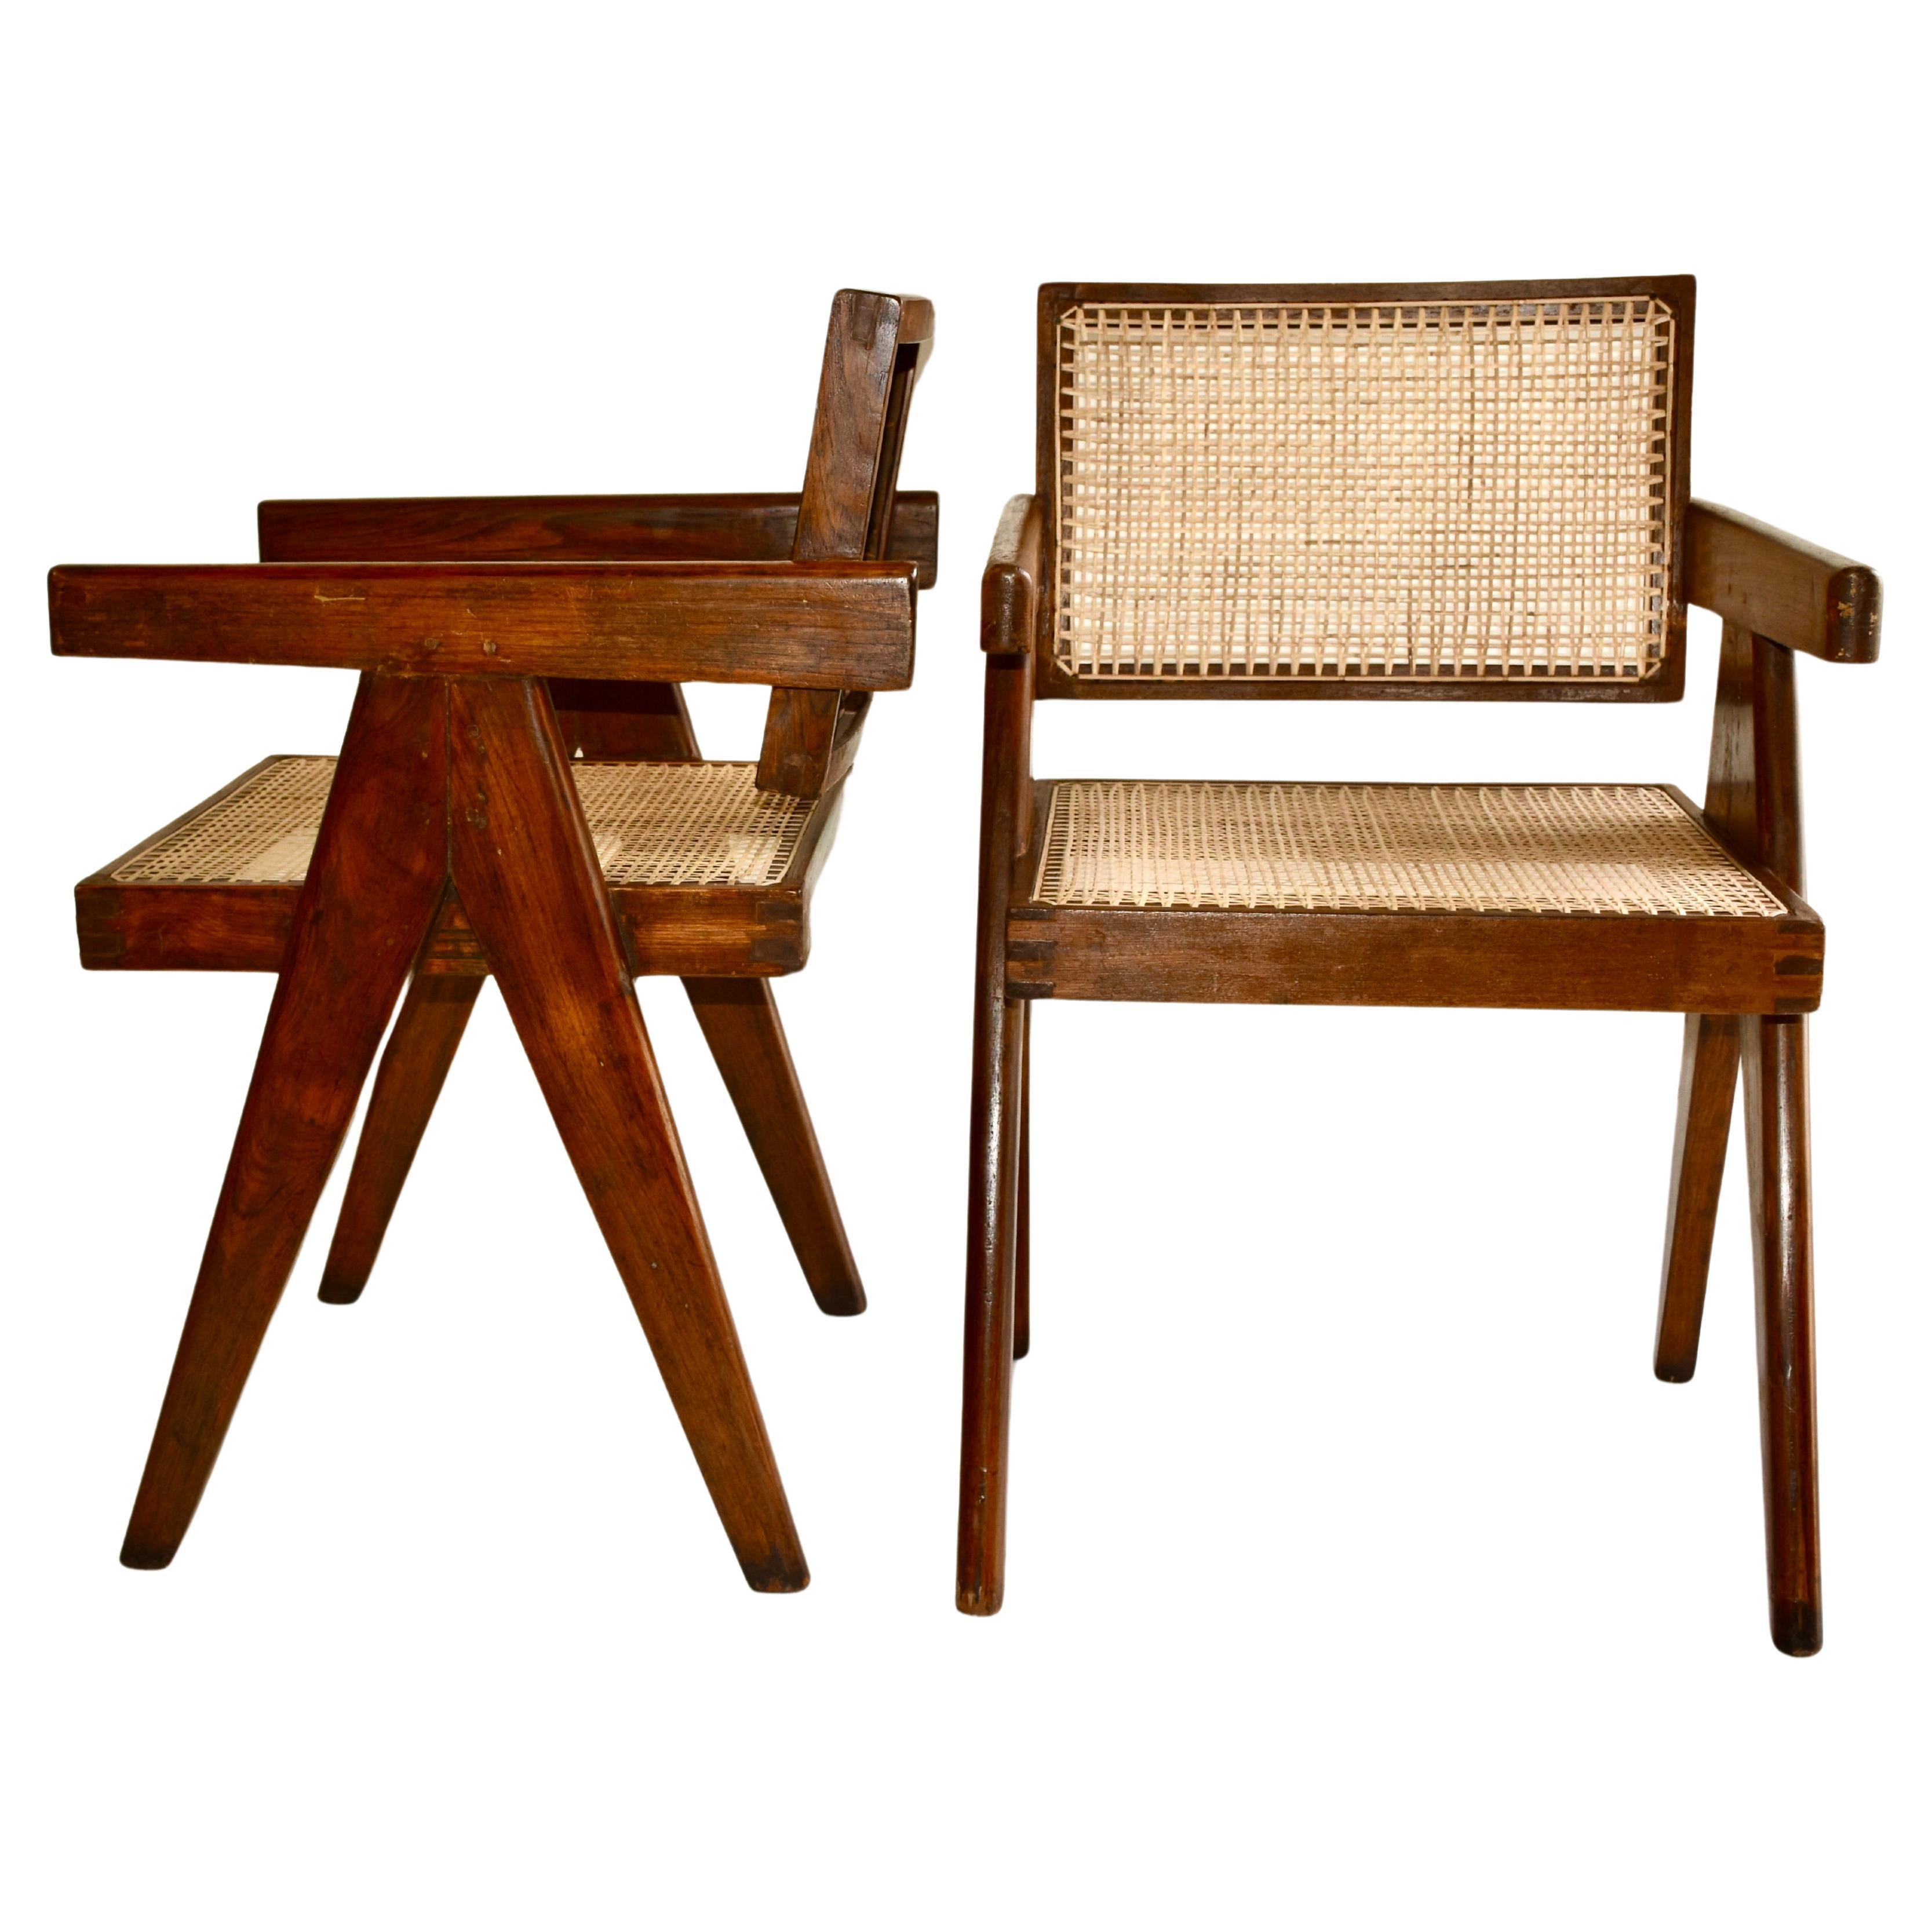 Pierre Jeanneret Set of 8 Office Cane Chairs Ca. 1955-1960 from Chandigarh For Sale 6